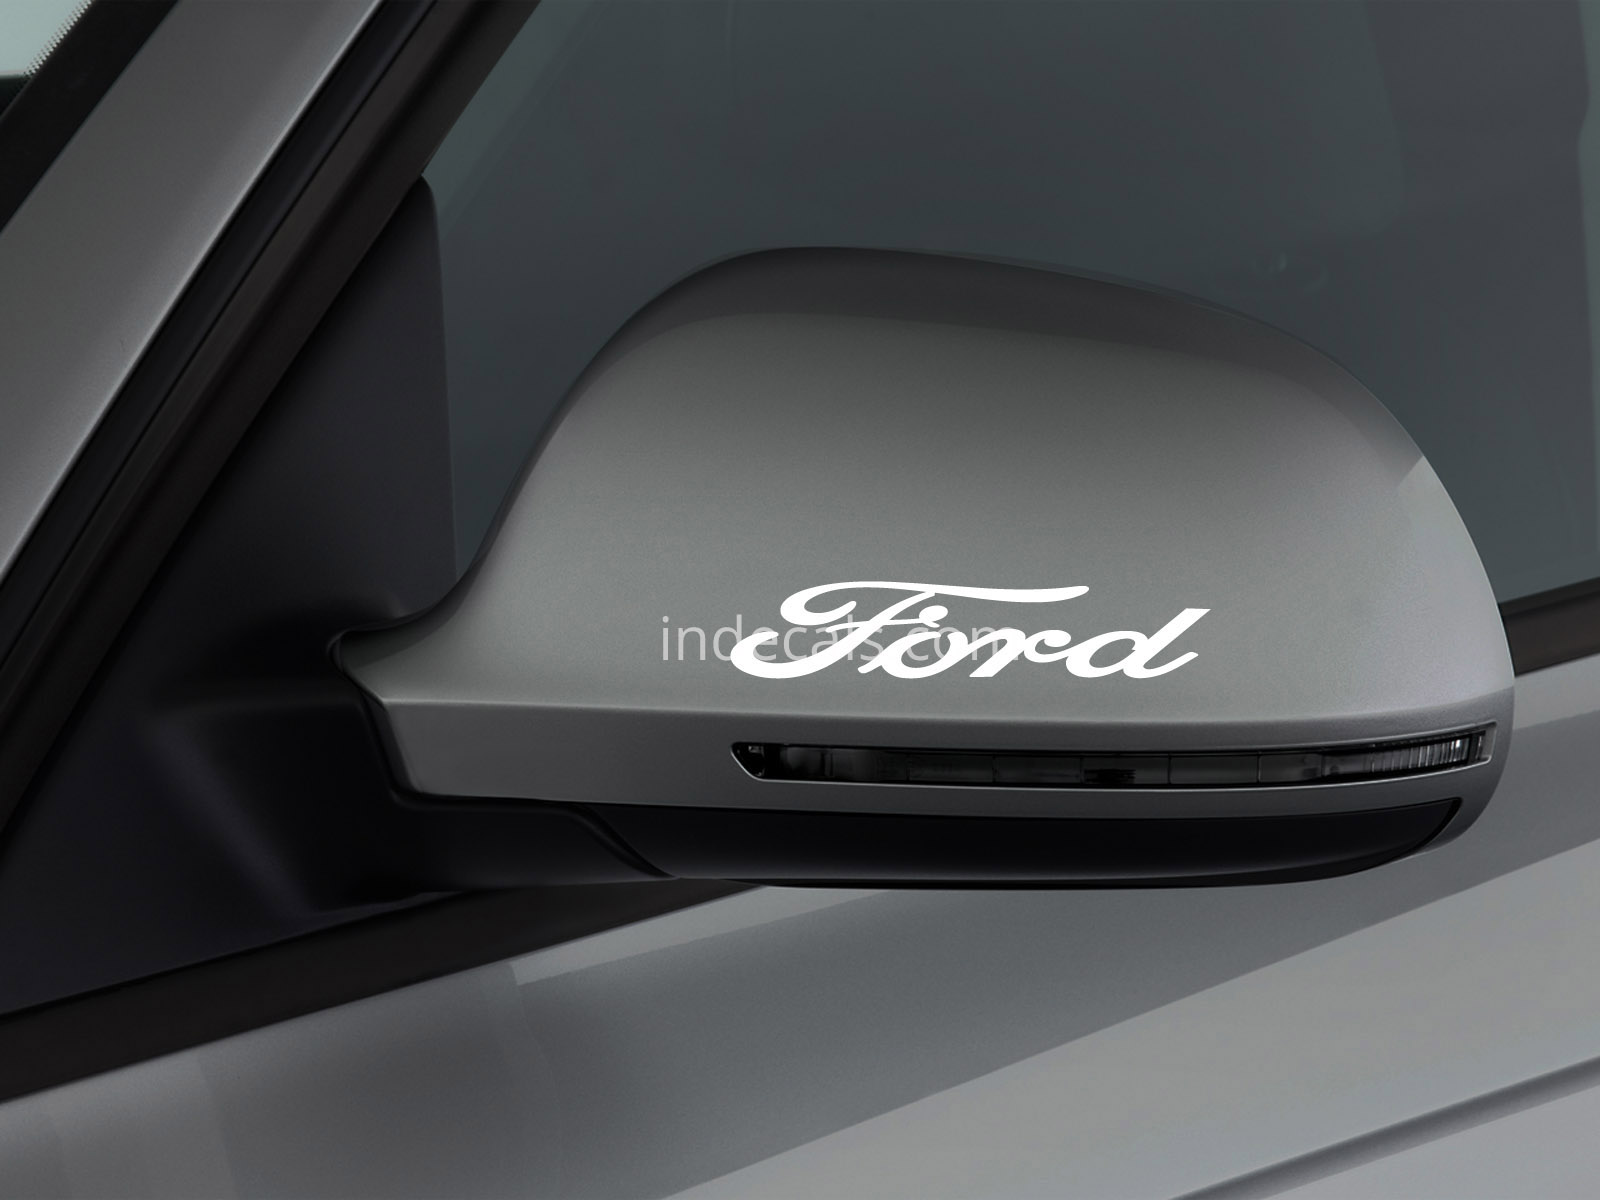 3 x Ford Stickers for Mirror - White